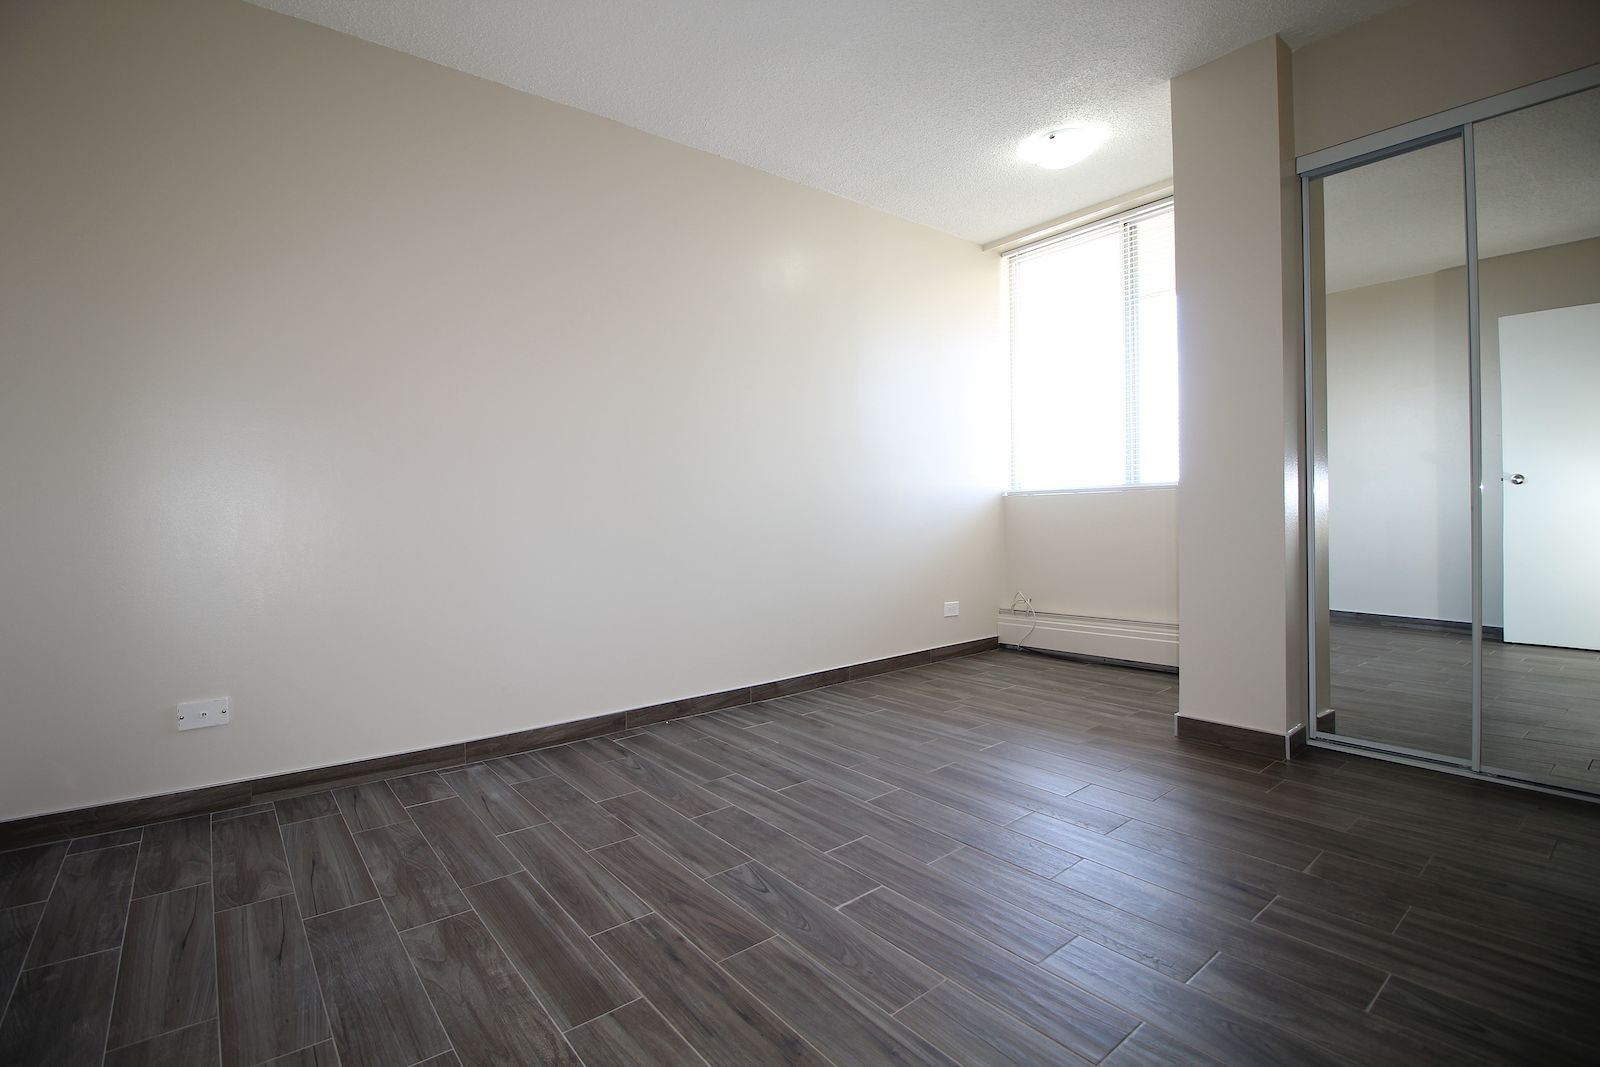 alberta hardwood flooring calgary ab of calgary apartment for rent downtown heart of downtown this clean in completely renovated 2 bedroom stunning apartment